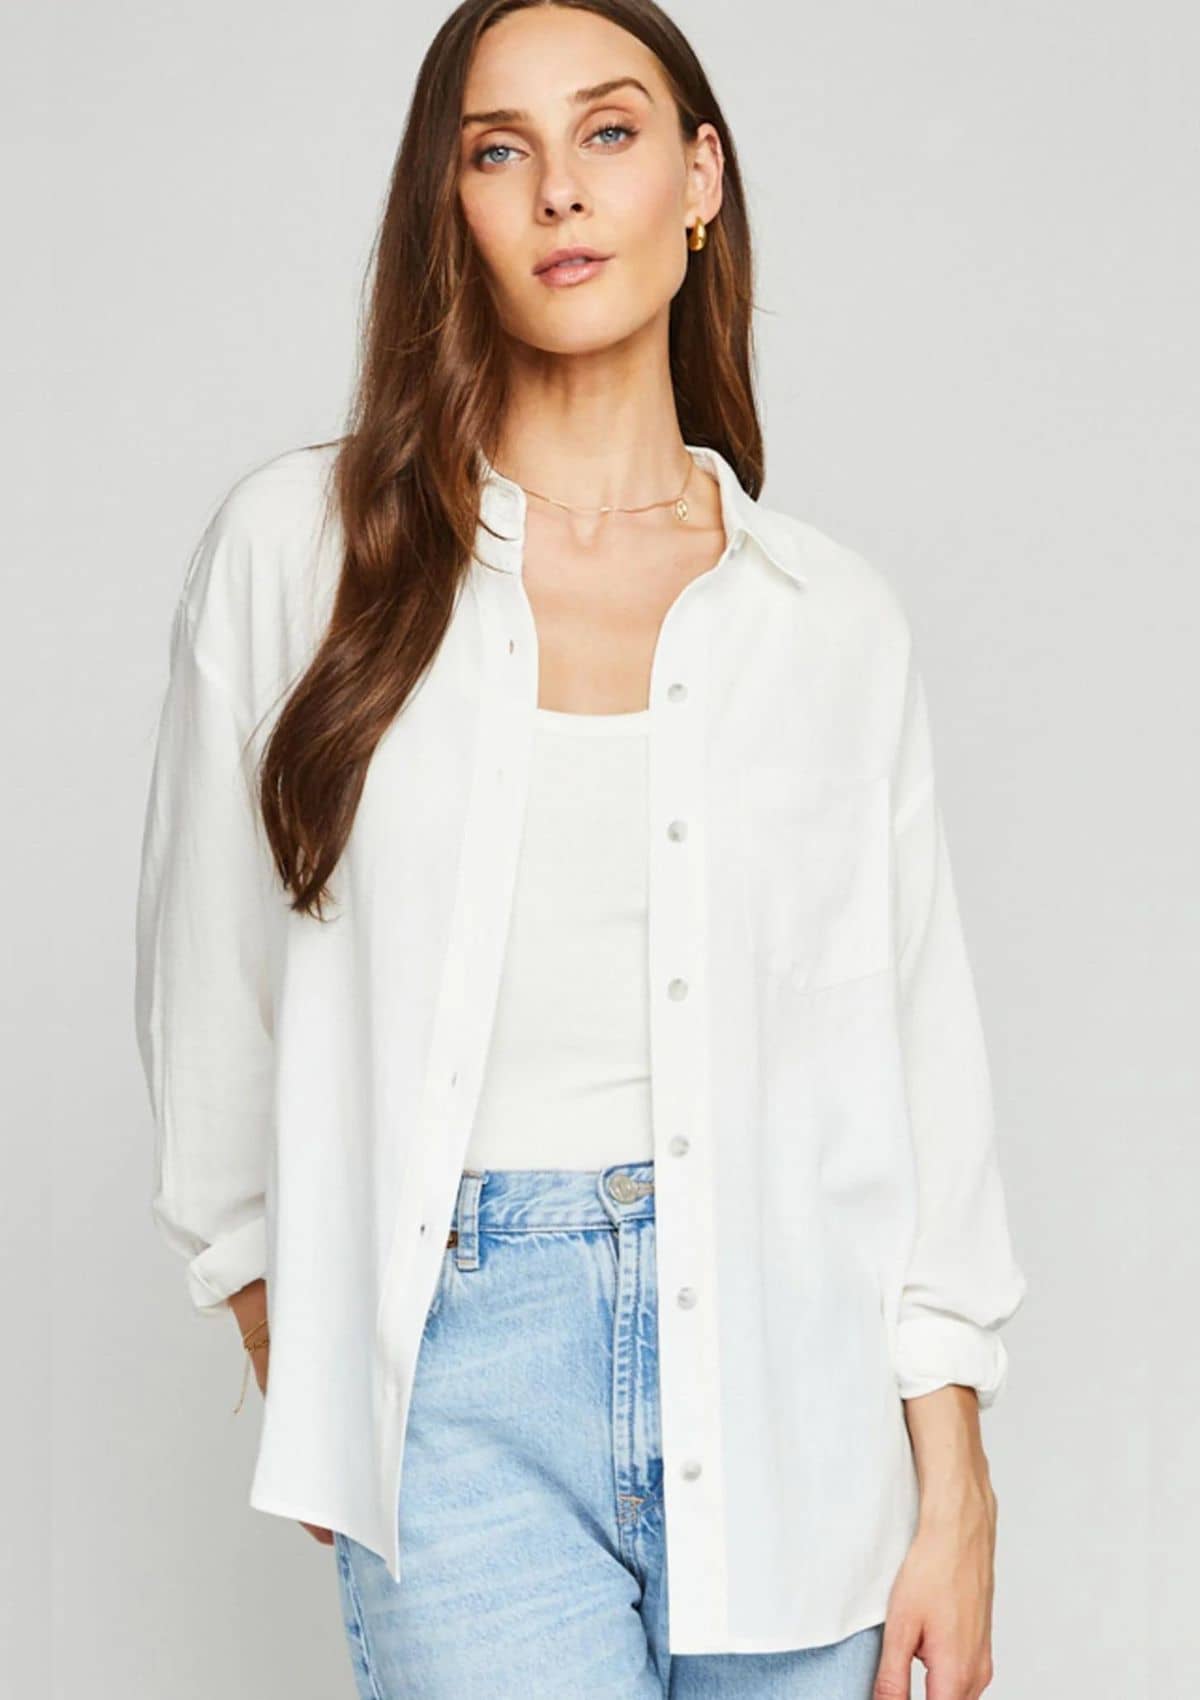 Blouses-Buttondown Shirts-Casual Tops-Ruby Jane.